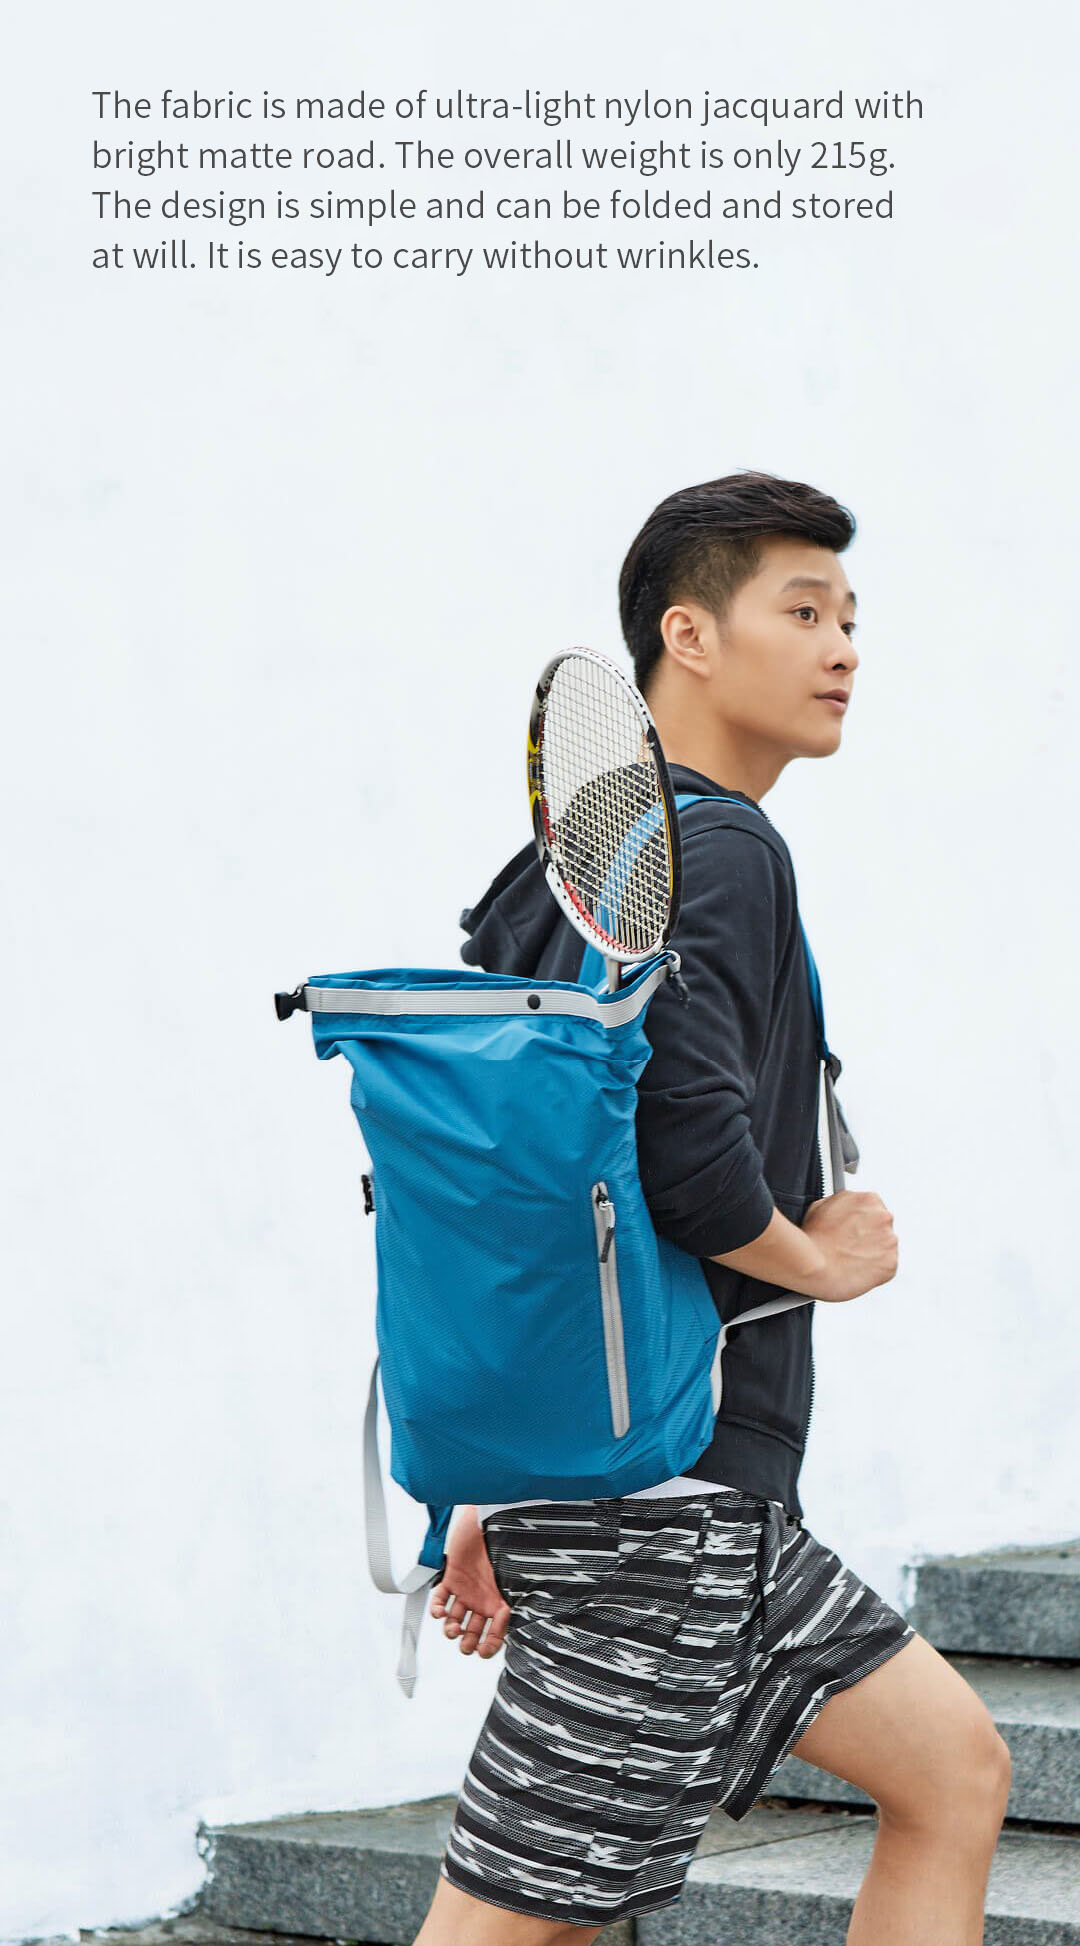 Outdoor-Backpack-Lightweight-Sports-Folding-Bag-Portable-Camping-Hiking-School-Bag-from-XIAOMI-YOUPI-1504212-2